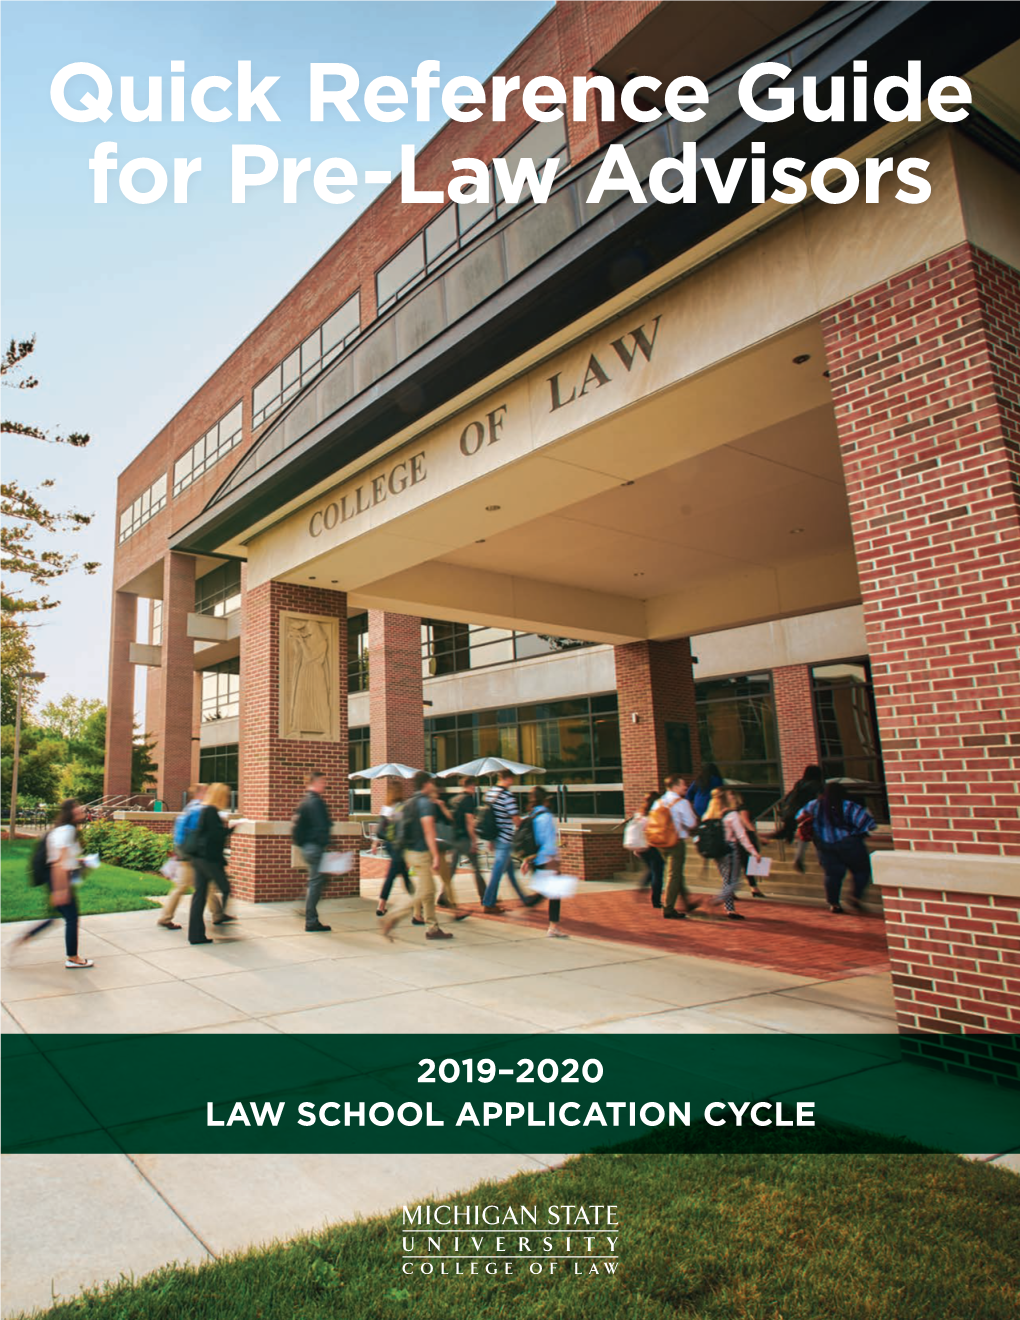 Quick Reference Guide for Pre-Law Advisors